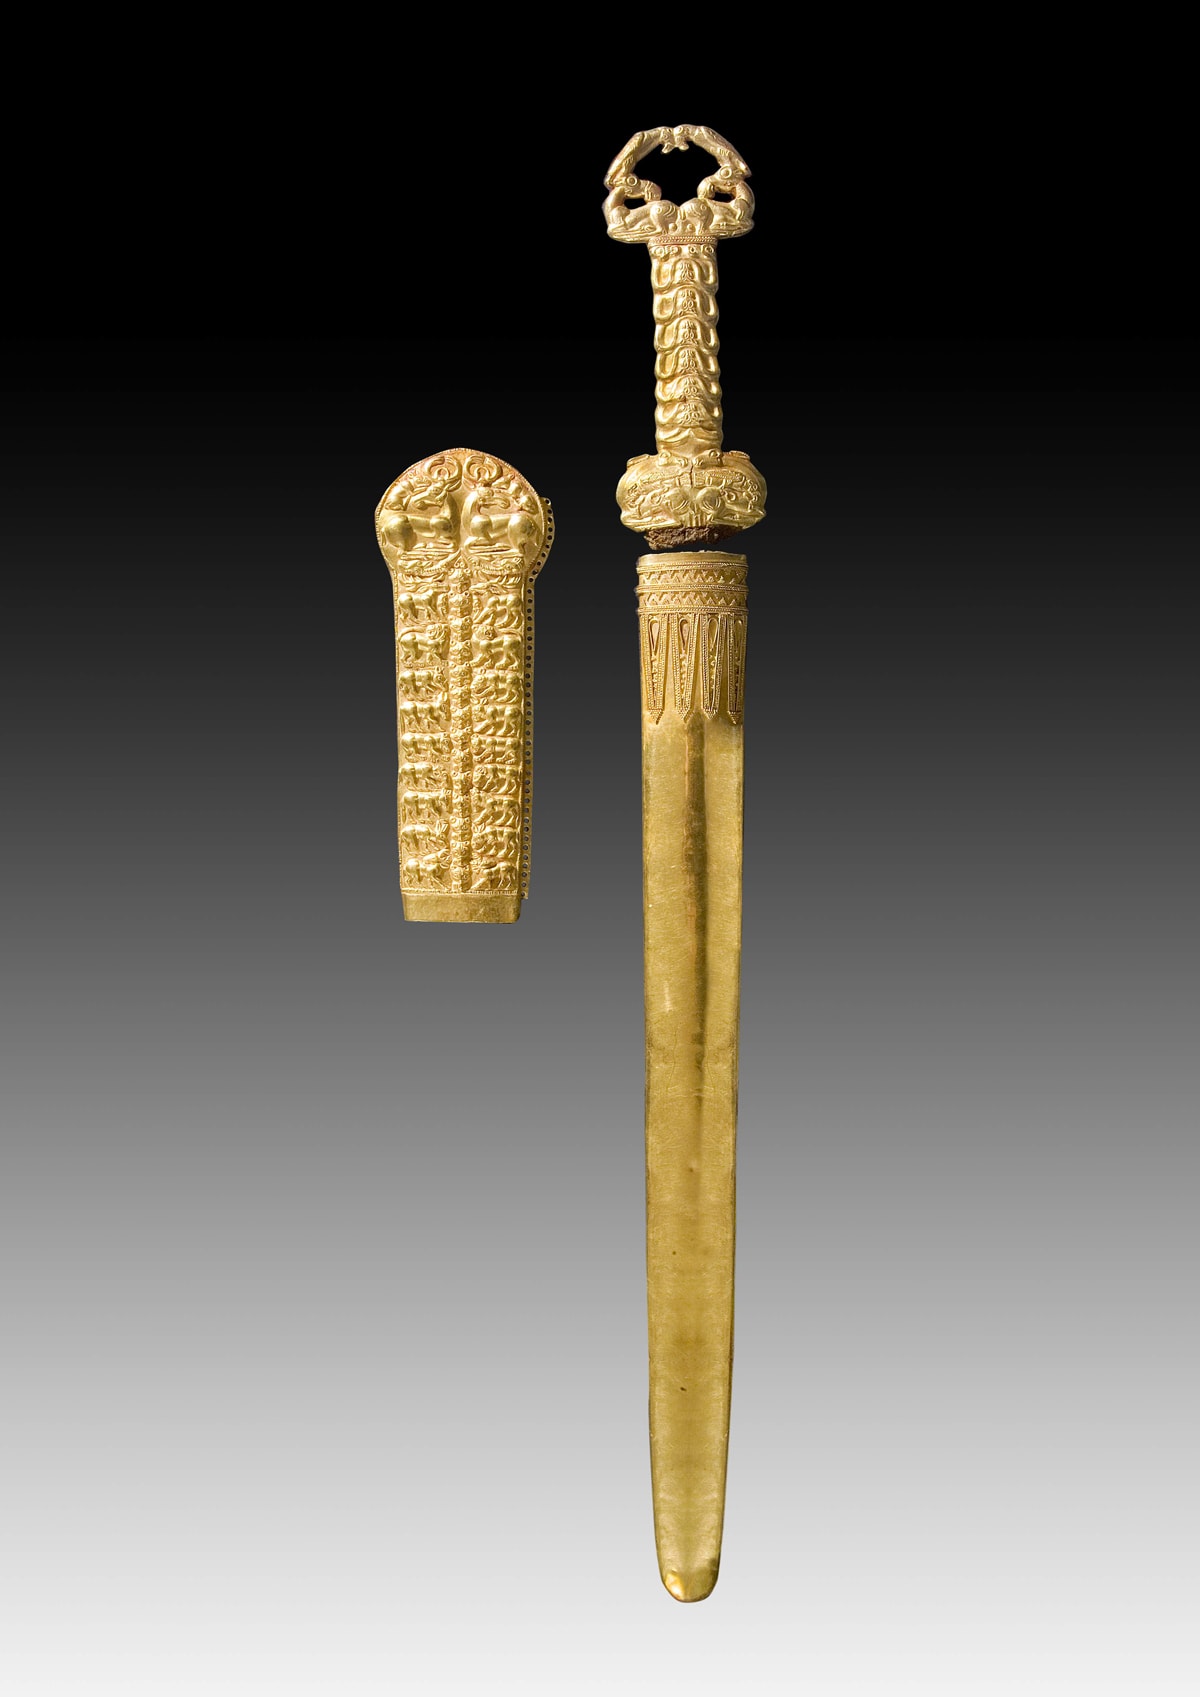 Sword in a gold scabbard